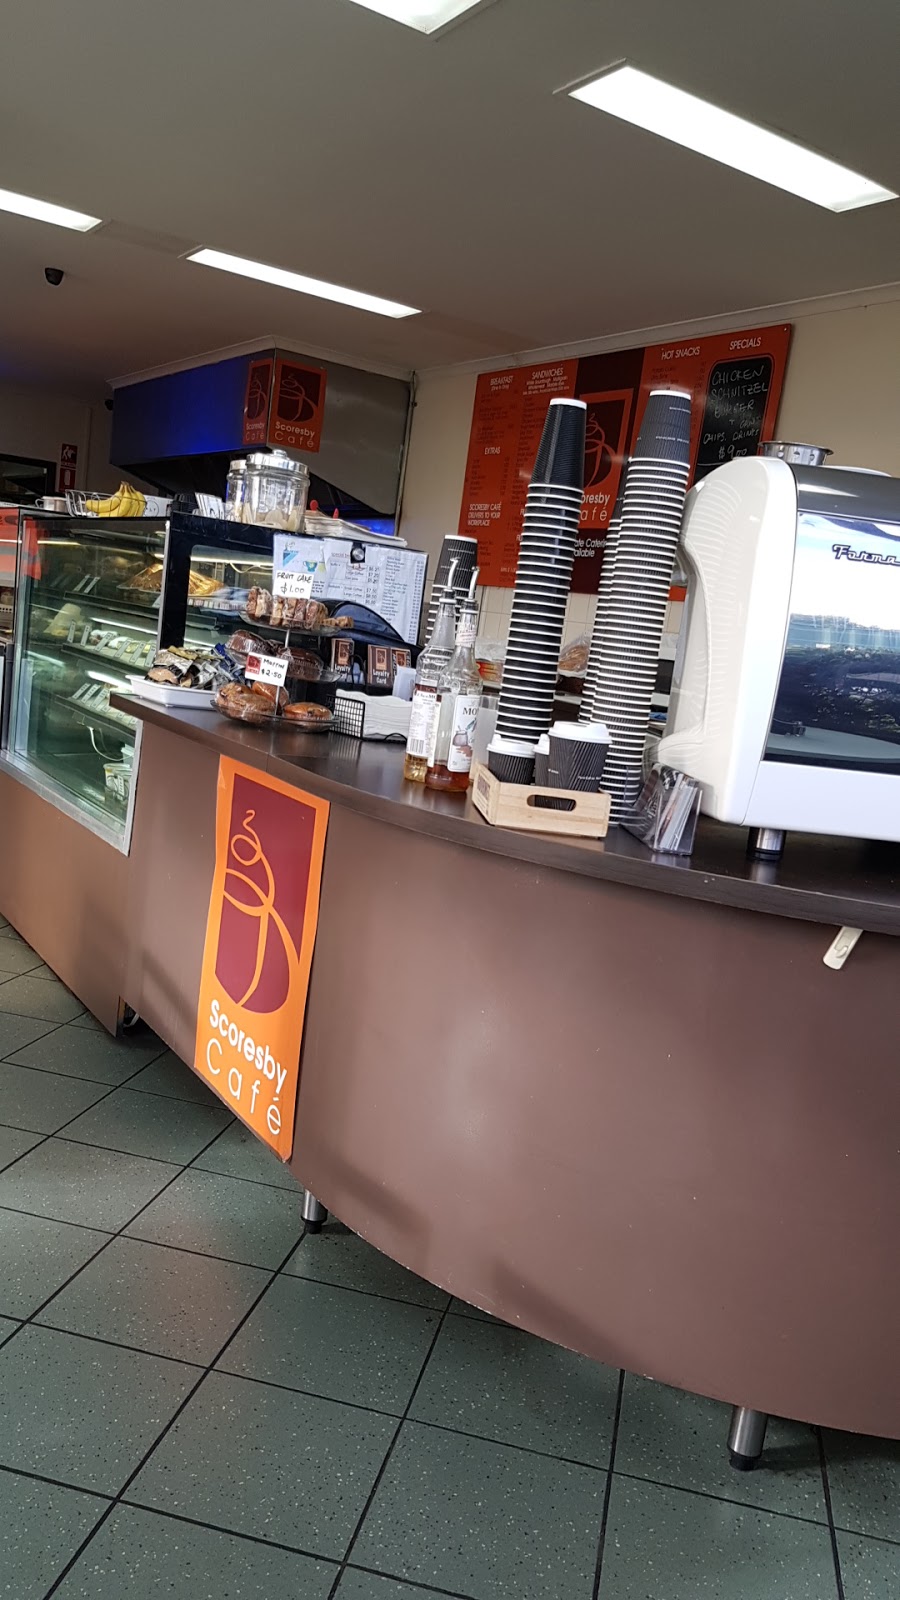 Scoresby Cafe | cafe | 17 Nyadale Dr, Scoresby VIC 3179, Australia | 0397639403 OR +61 3 9763 9403